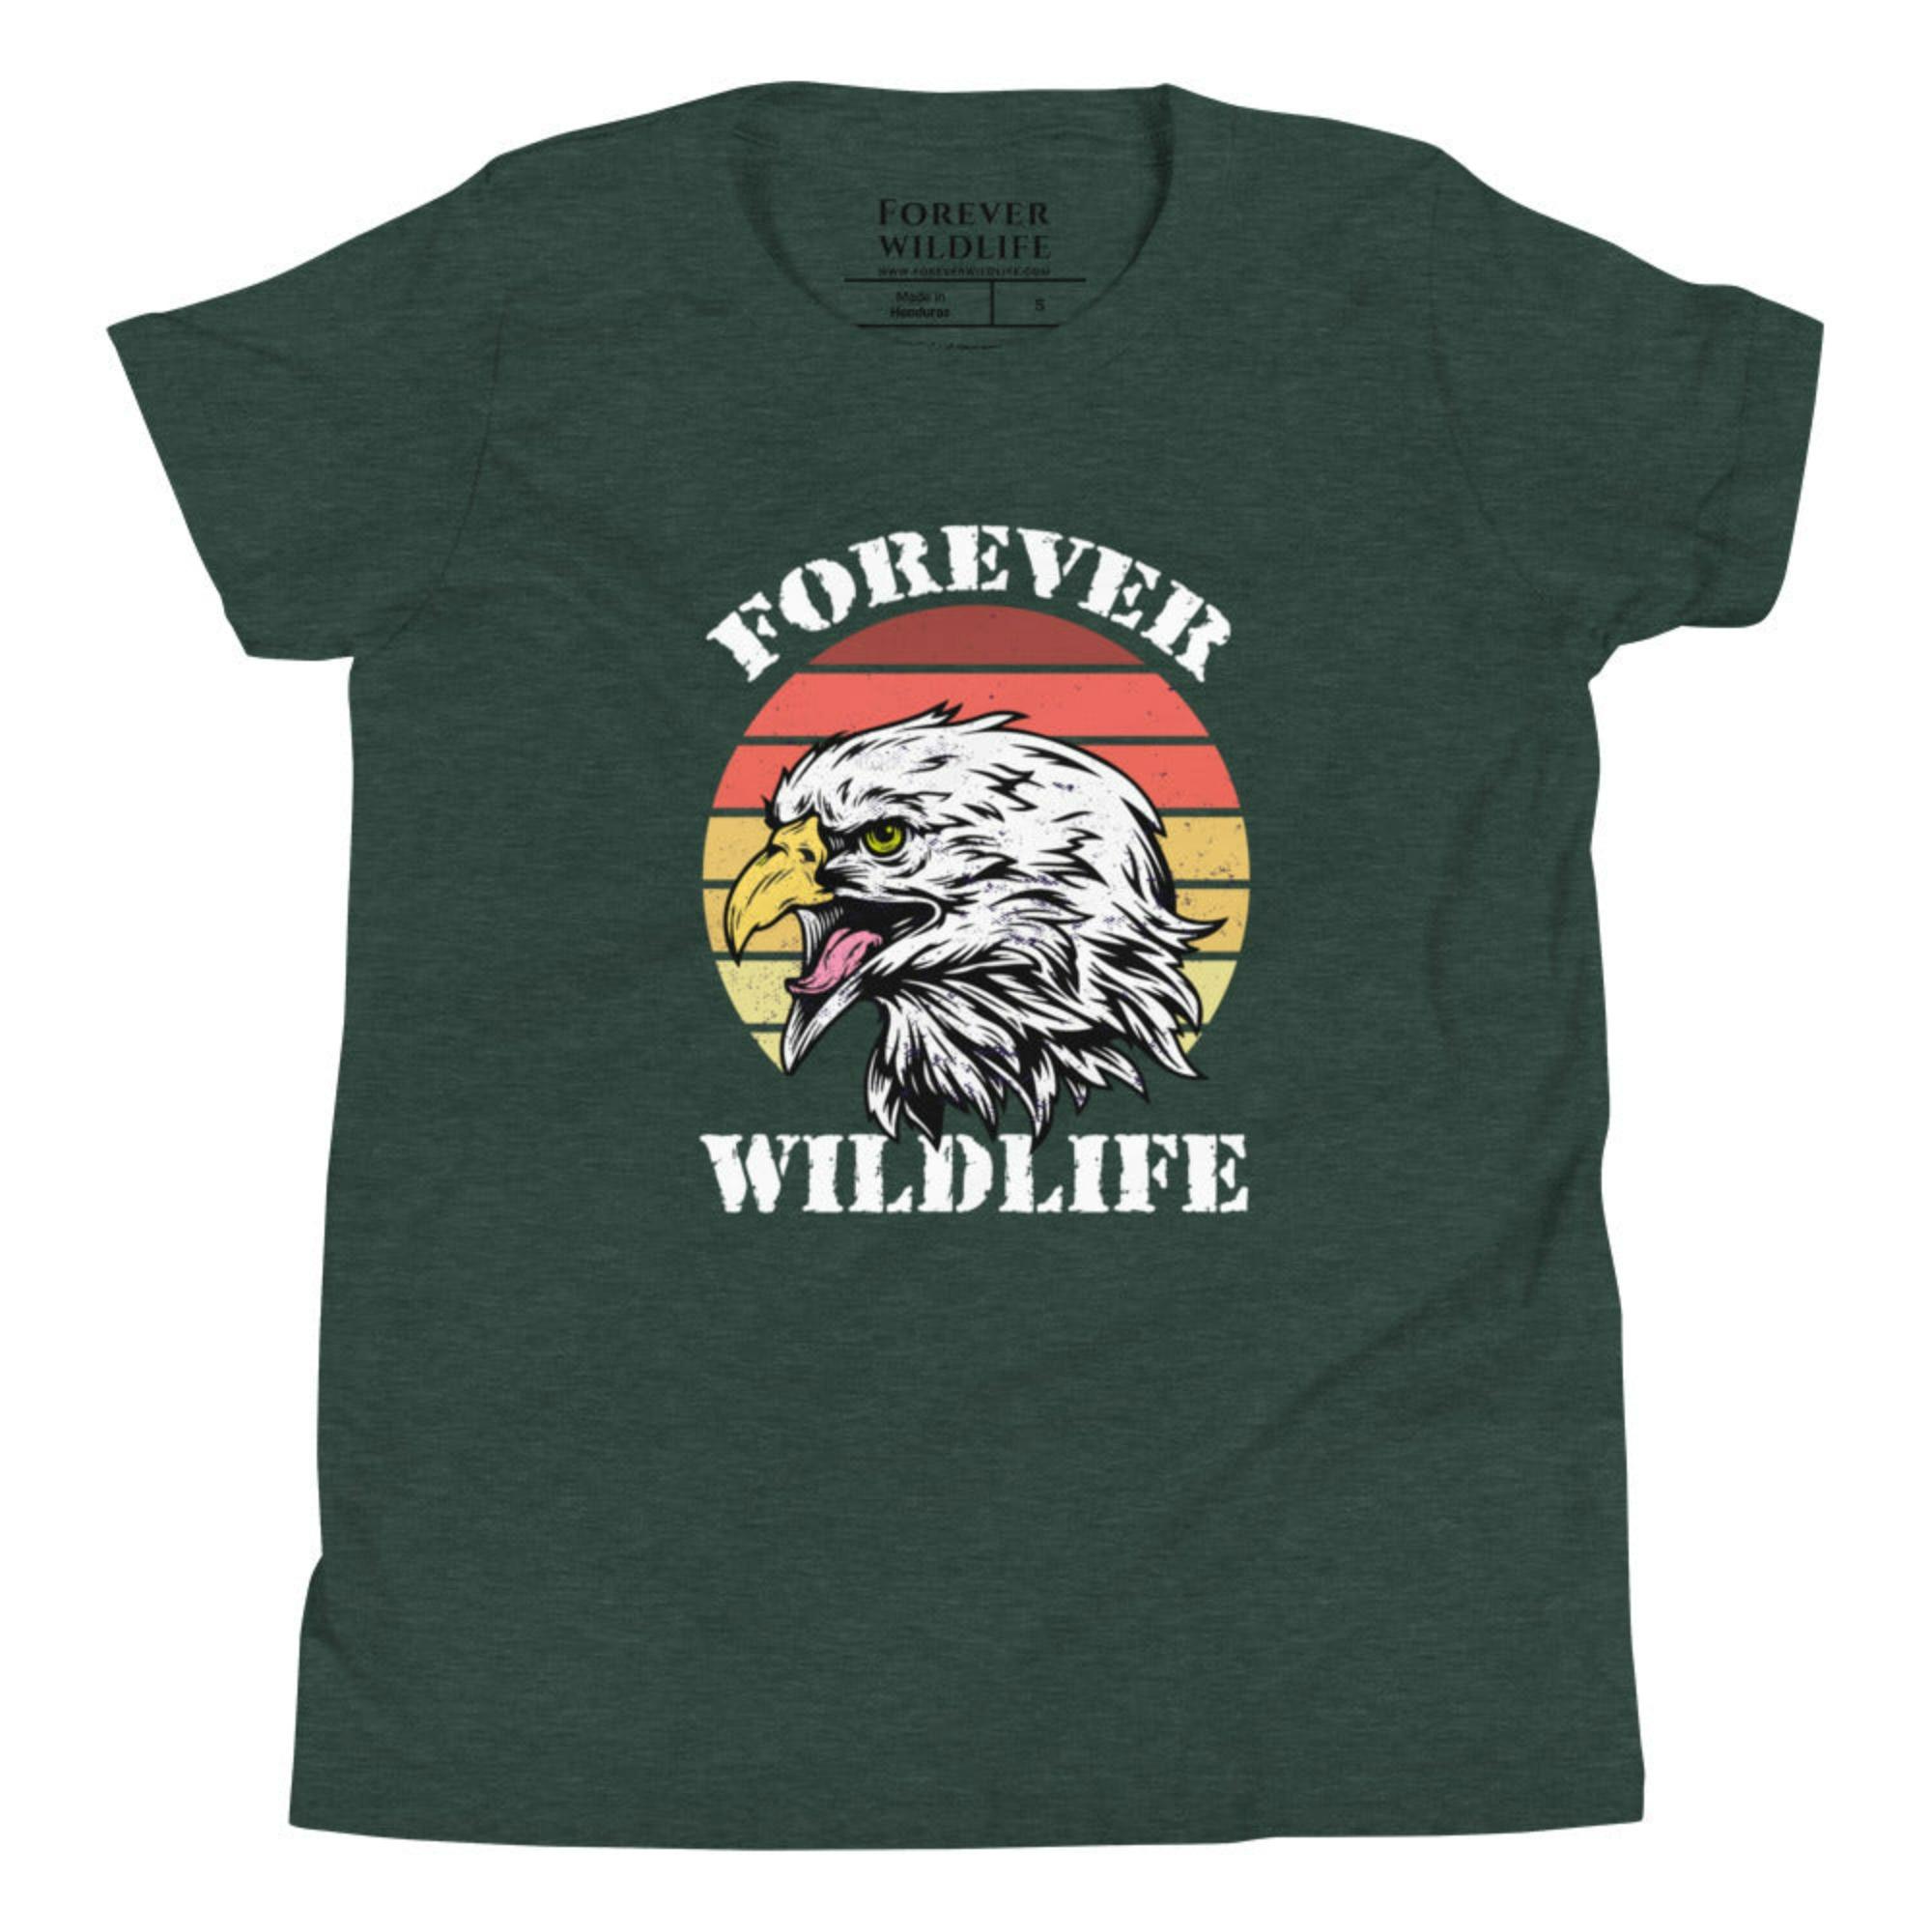 Heather Tee, Youth T-Shirt with Eagle graphic as part of Wildlife T Shirts, Wildlife Clothing & Apparel by Forever Wildlife